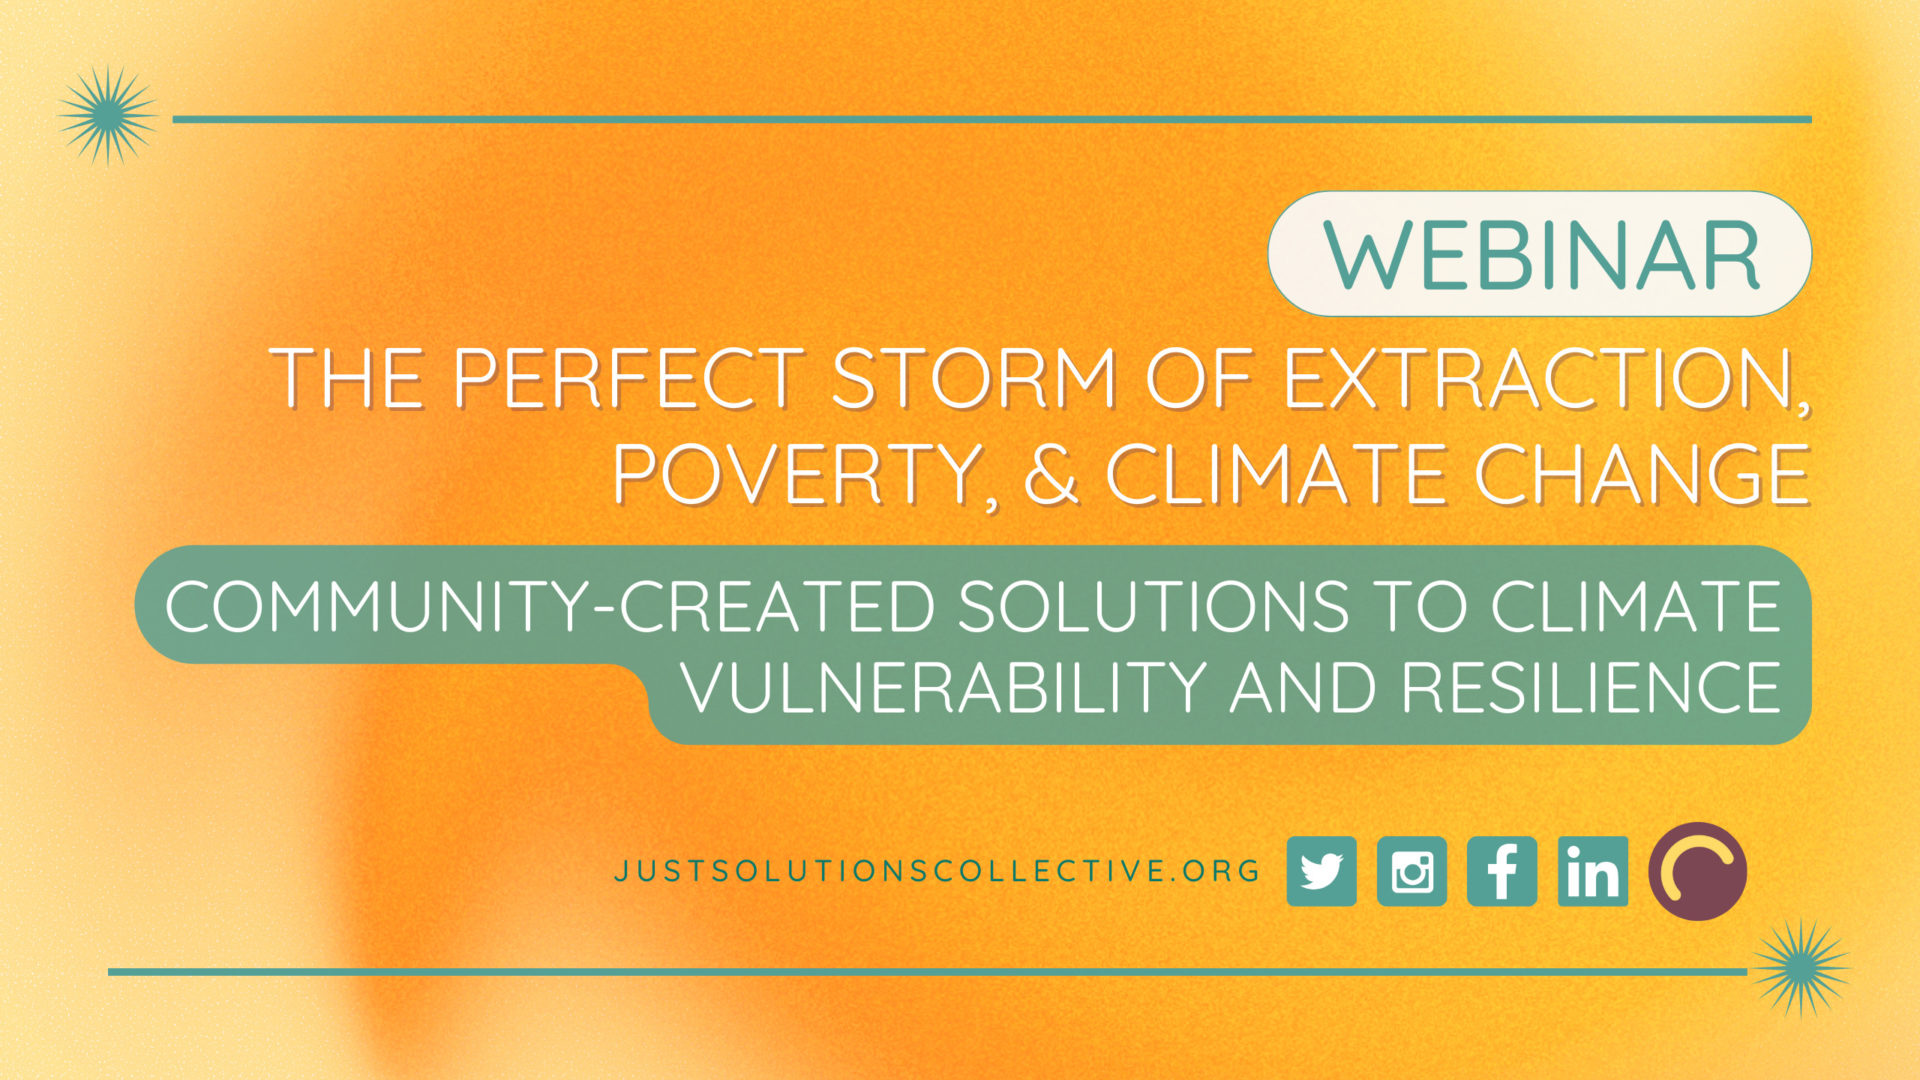 Webinar: Community-Created Solutions to Climate Vulnerability and Resilience